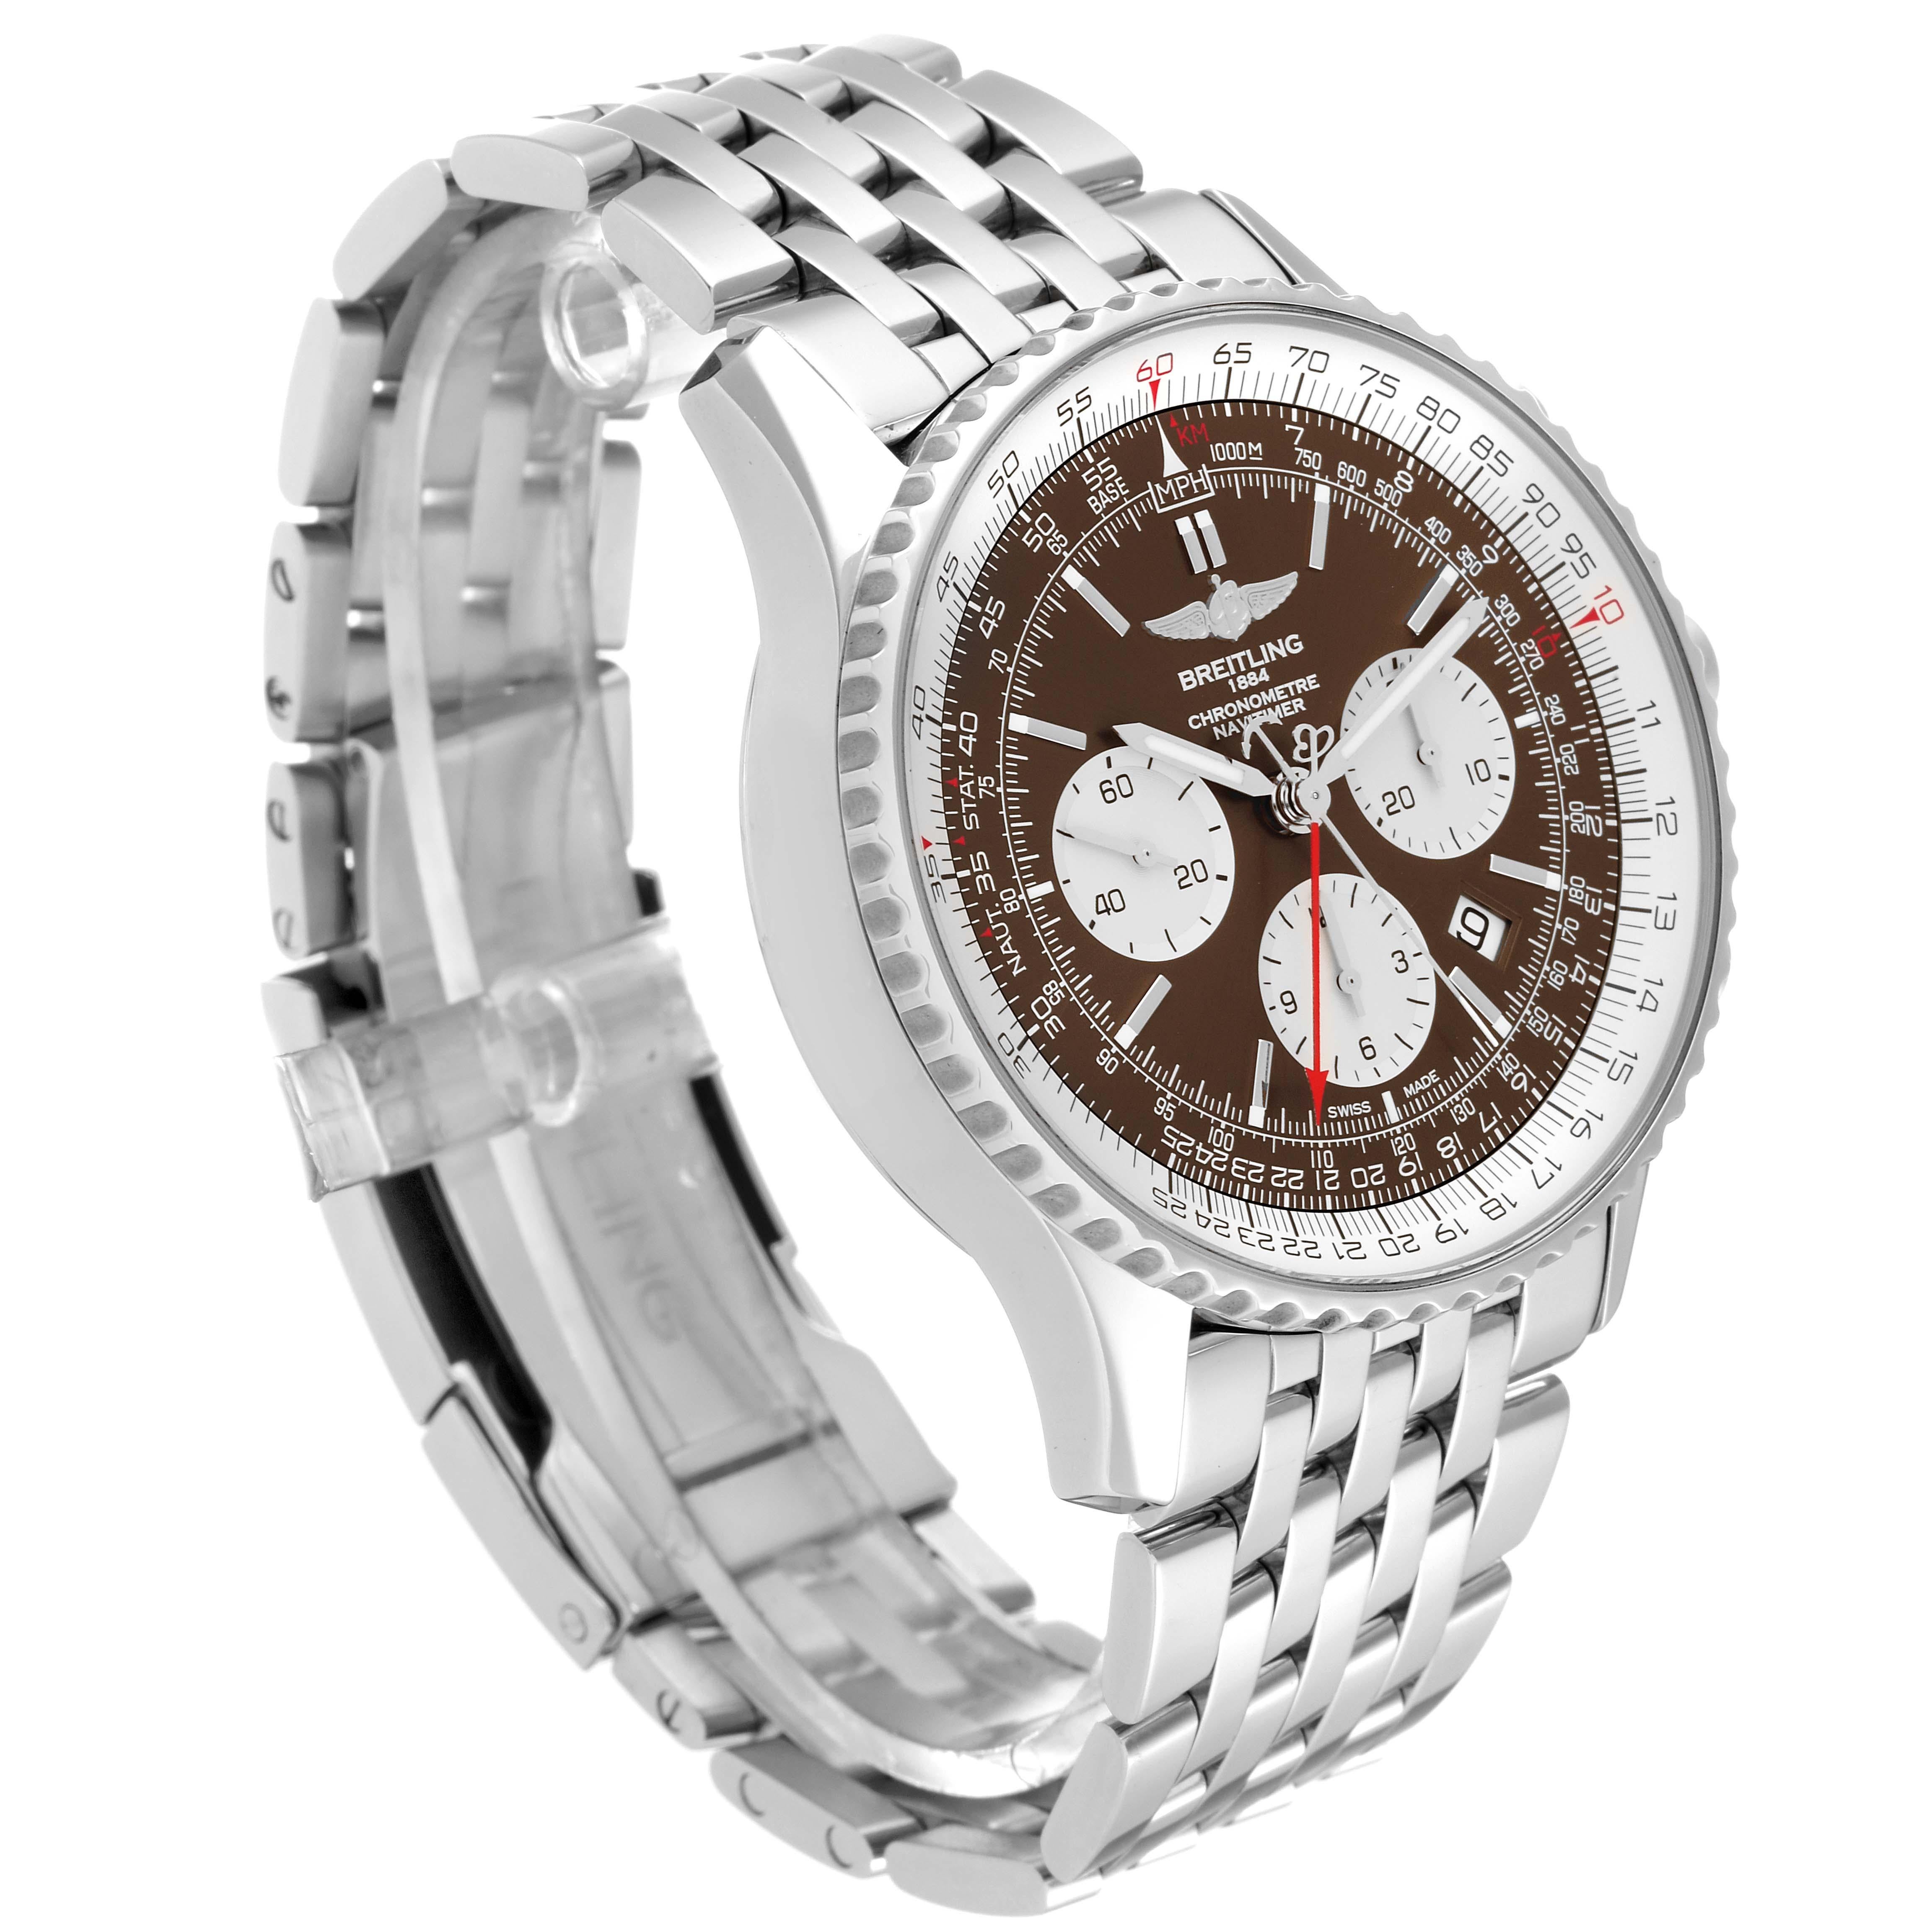 Breitling Navitimer Rattrapante Chronograph Steel Mens Watch AB0310 For Sale 2